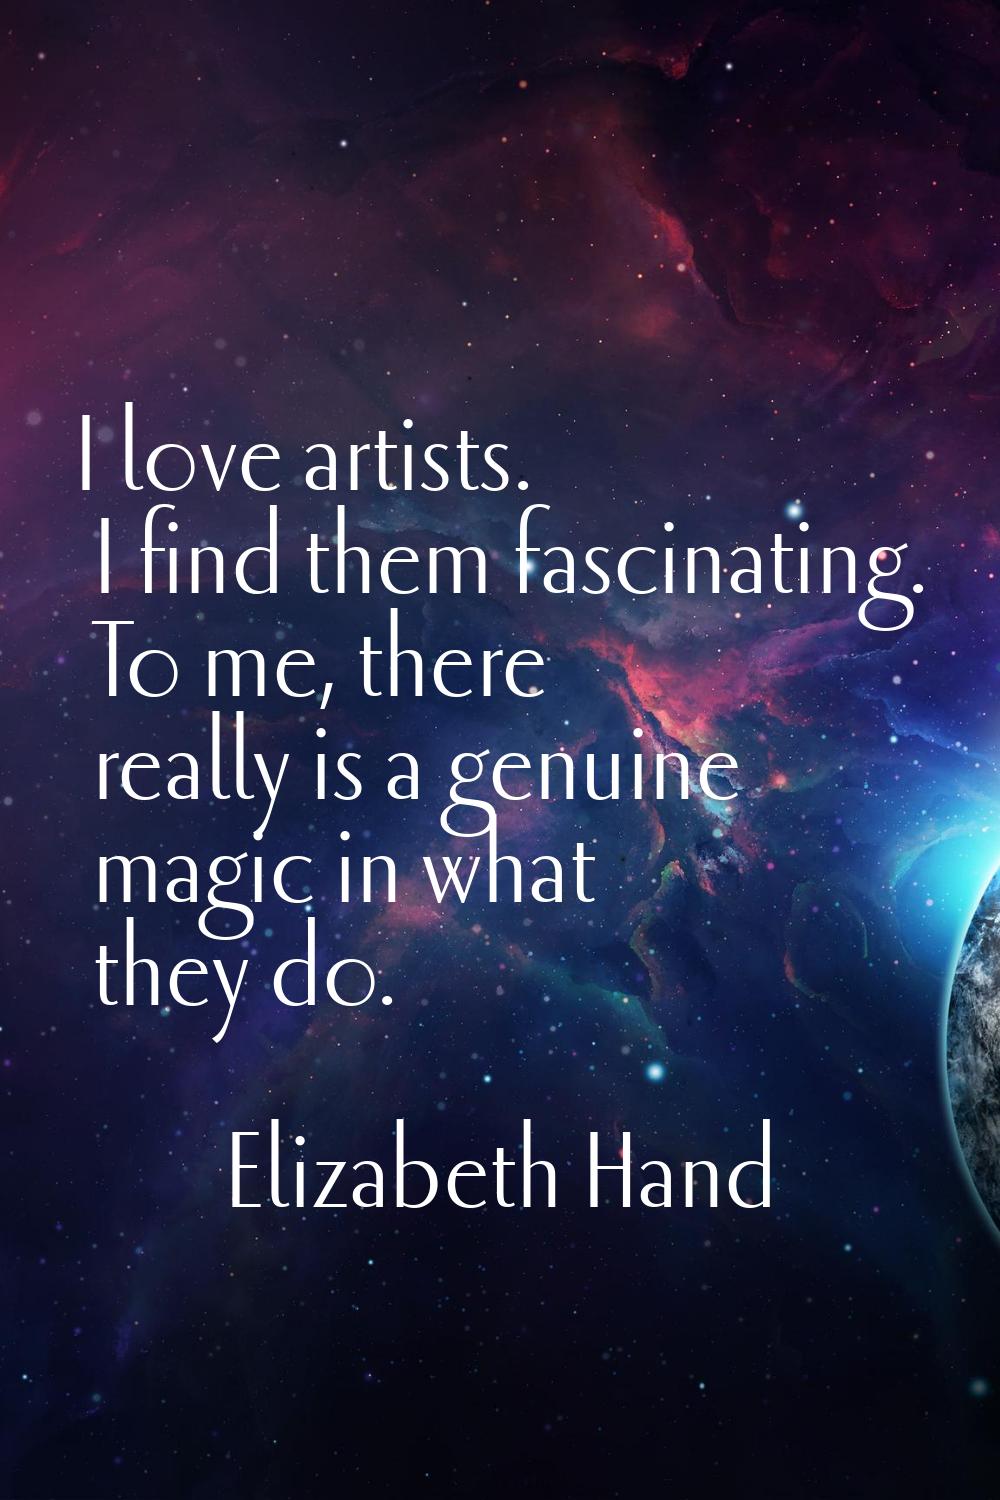 I love artists. I find them fascinating. To me, there really is a genuine magic in what they do.